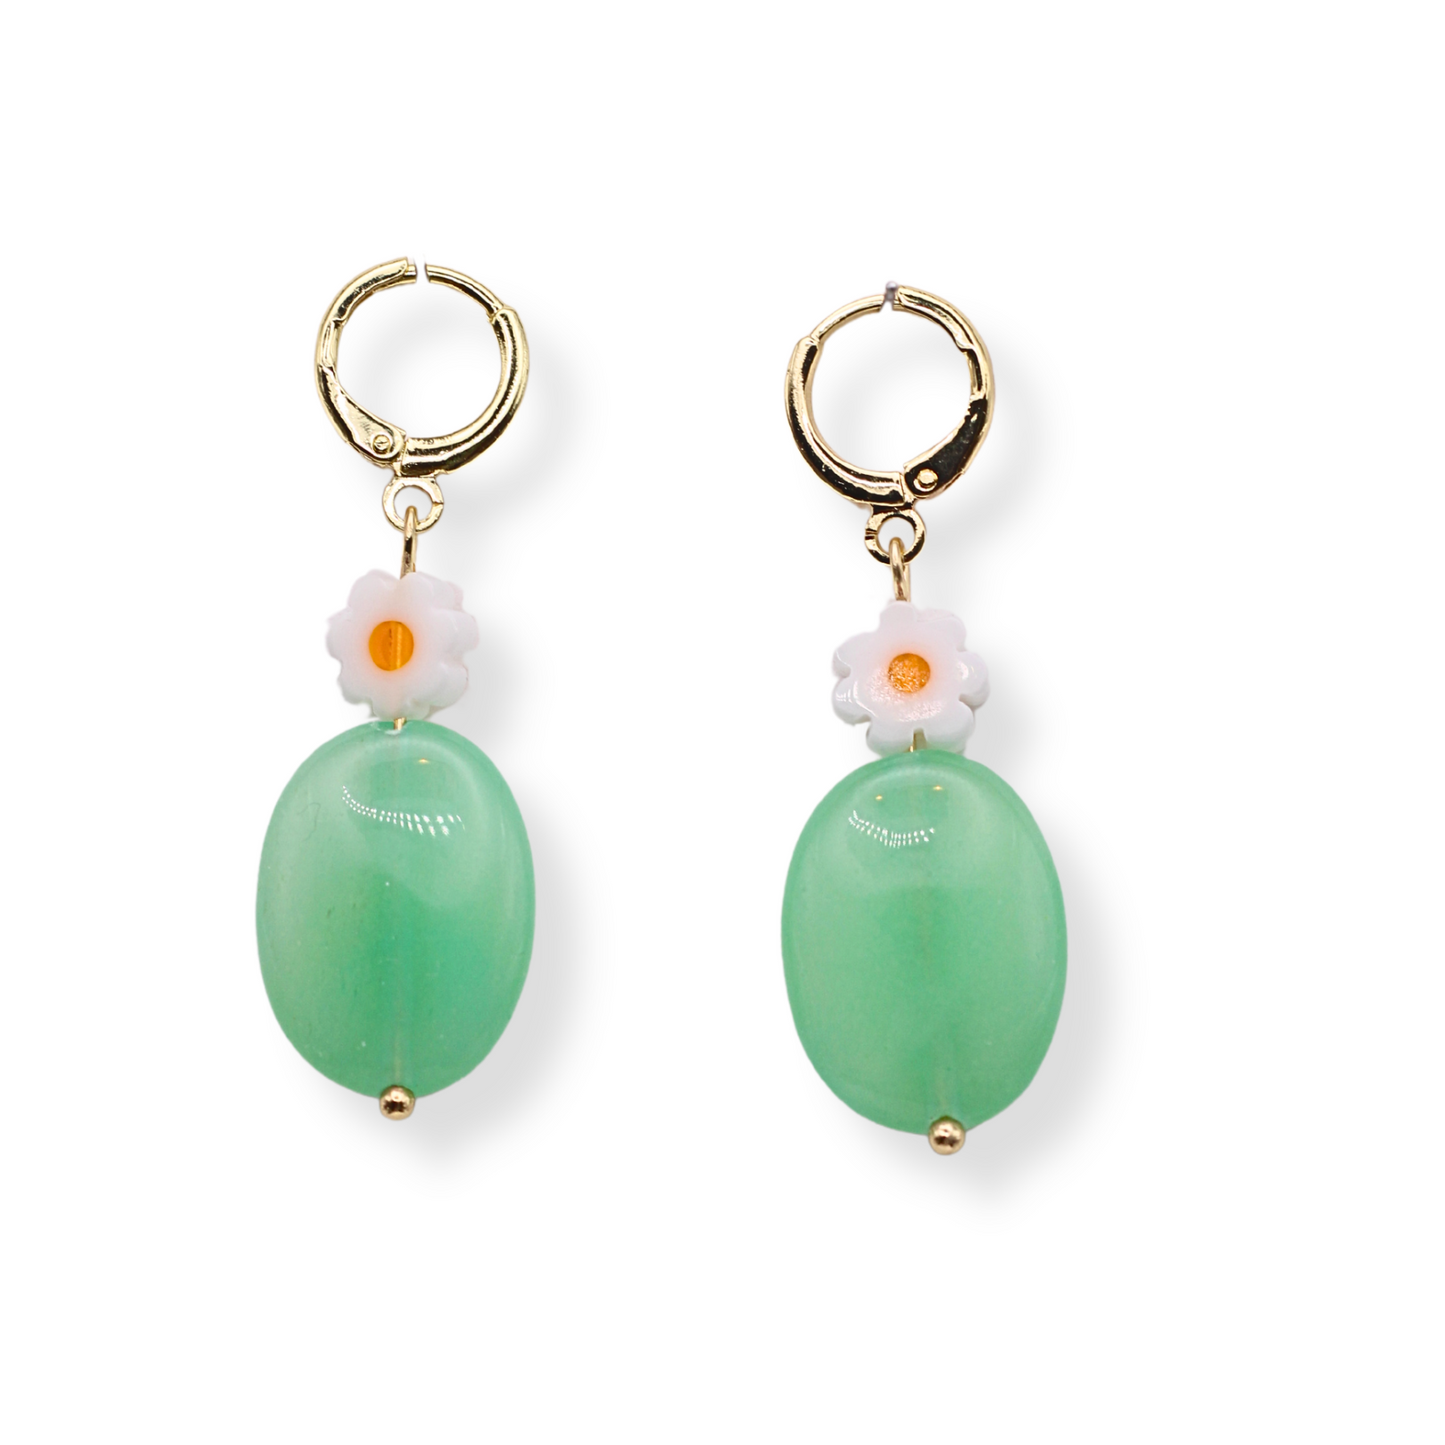 Get ready for spring with our Lola Flower Earrings. These dangle earrings feature a glass daisy bead, a solid jade stone bead, and hypoallergenic gold plated huggie hoops.